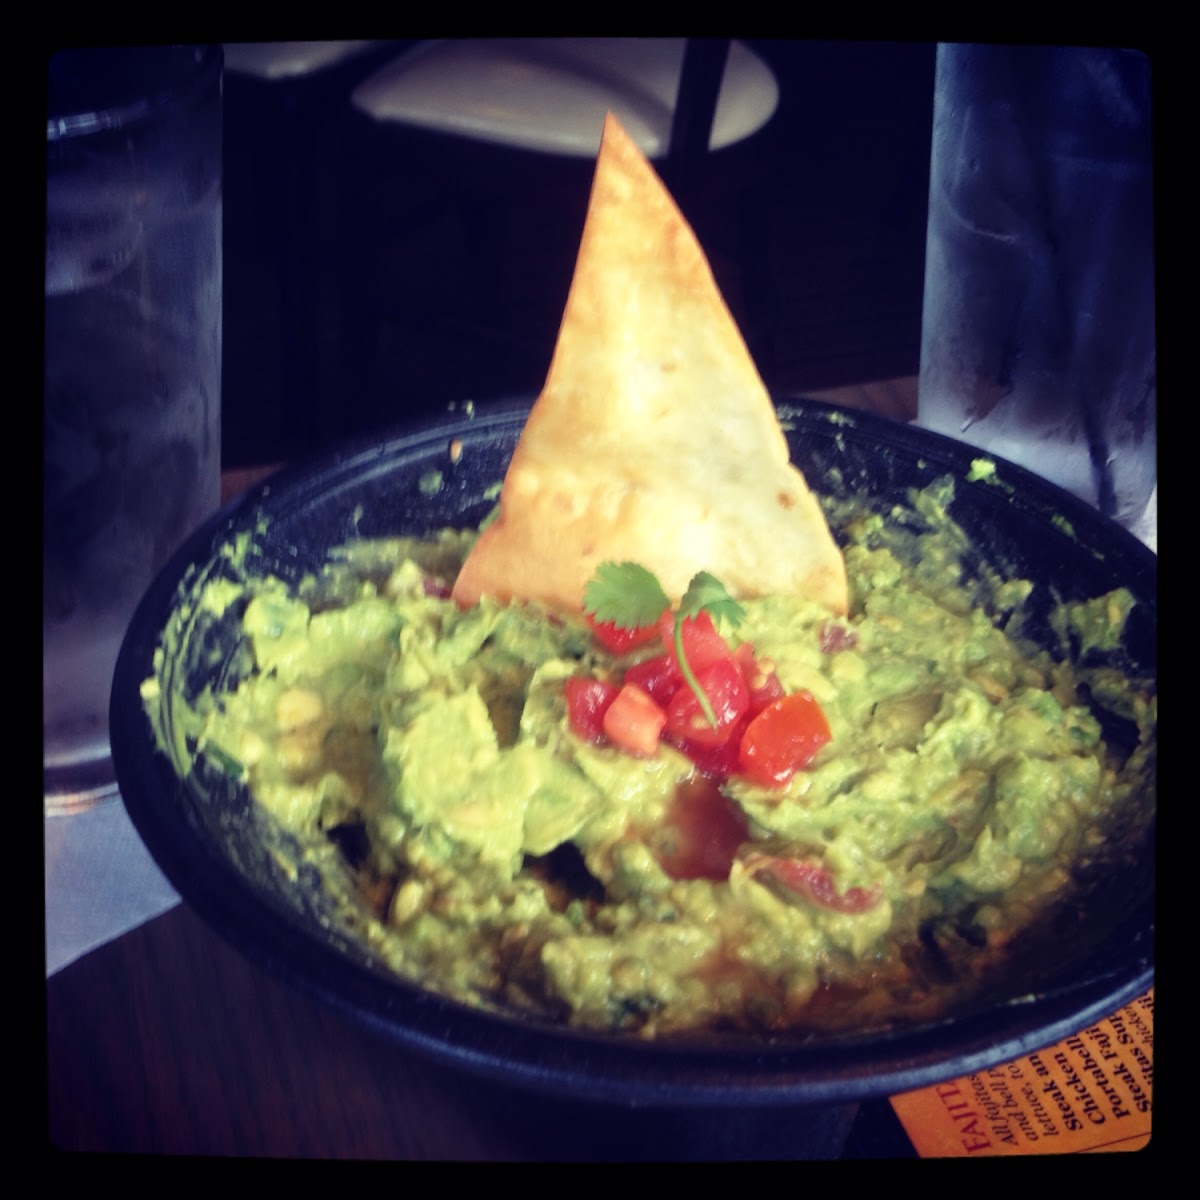 GF guacamole appetizer served with a non GF pita sticking out of it. Pita was not mentioned on the m